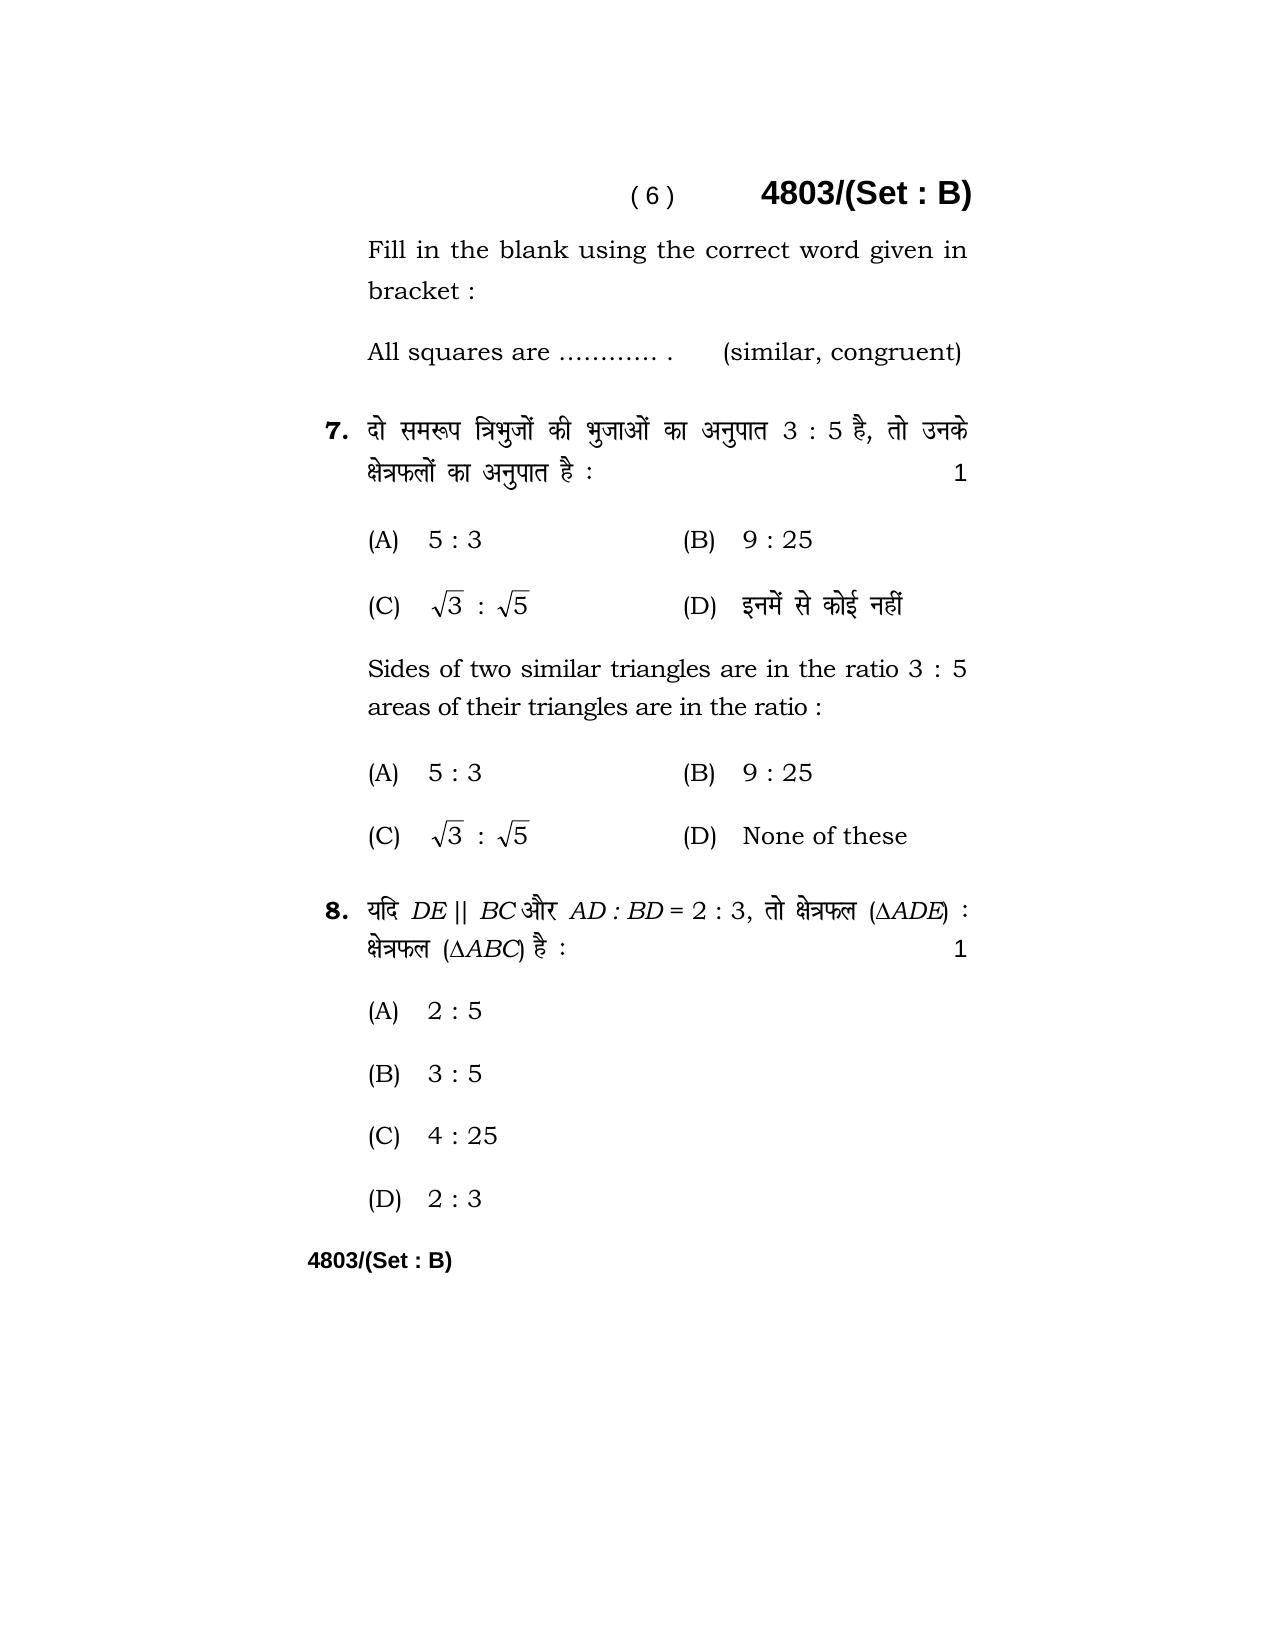 Haryana Board HBSE Class 10 Mathematics 2020 Question Paper - Page 22